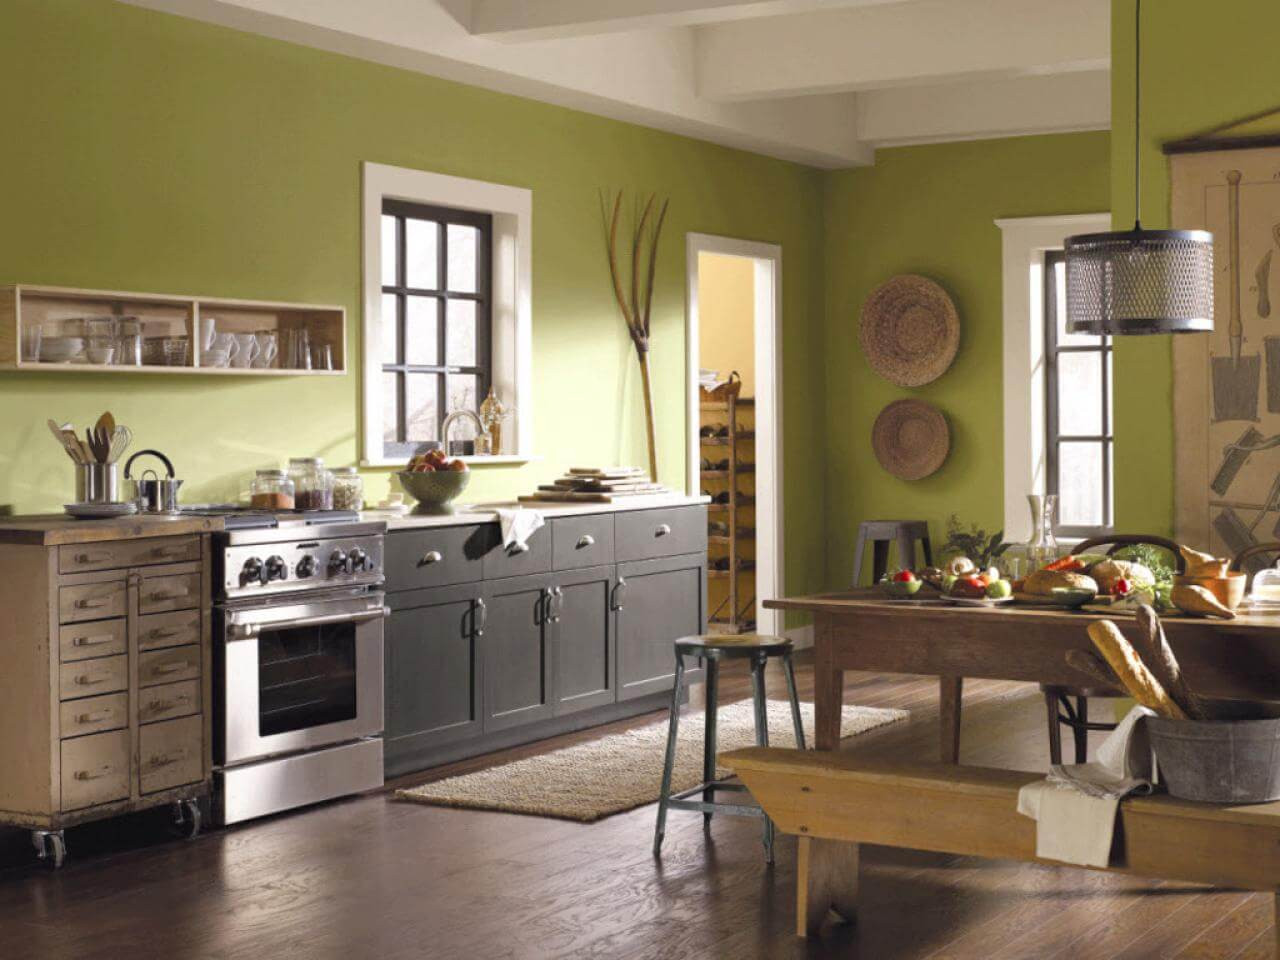 Kitchen Wall Colors
 Trending Kitchen Wall Colors For The Year 2019